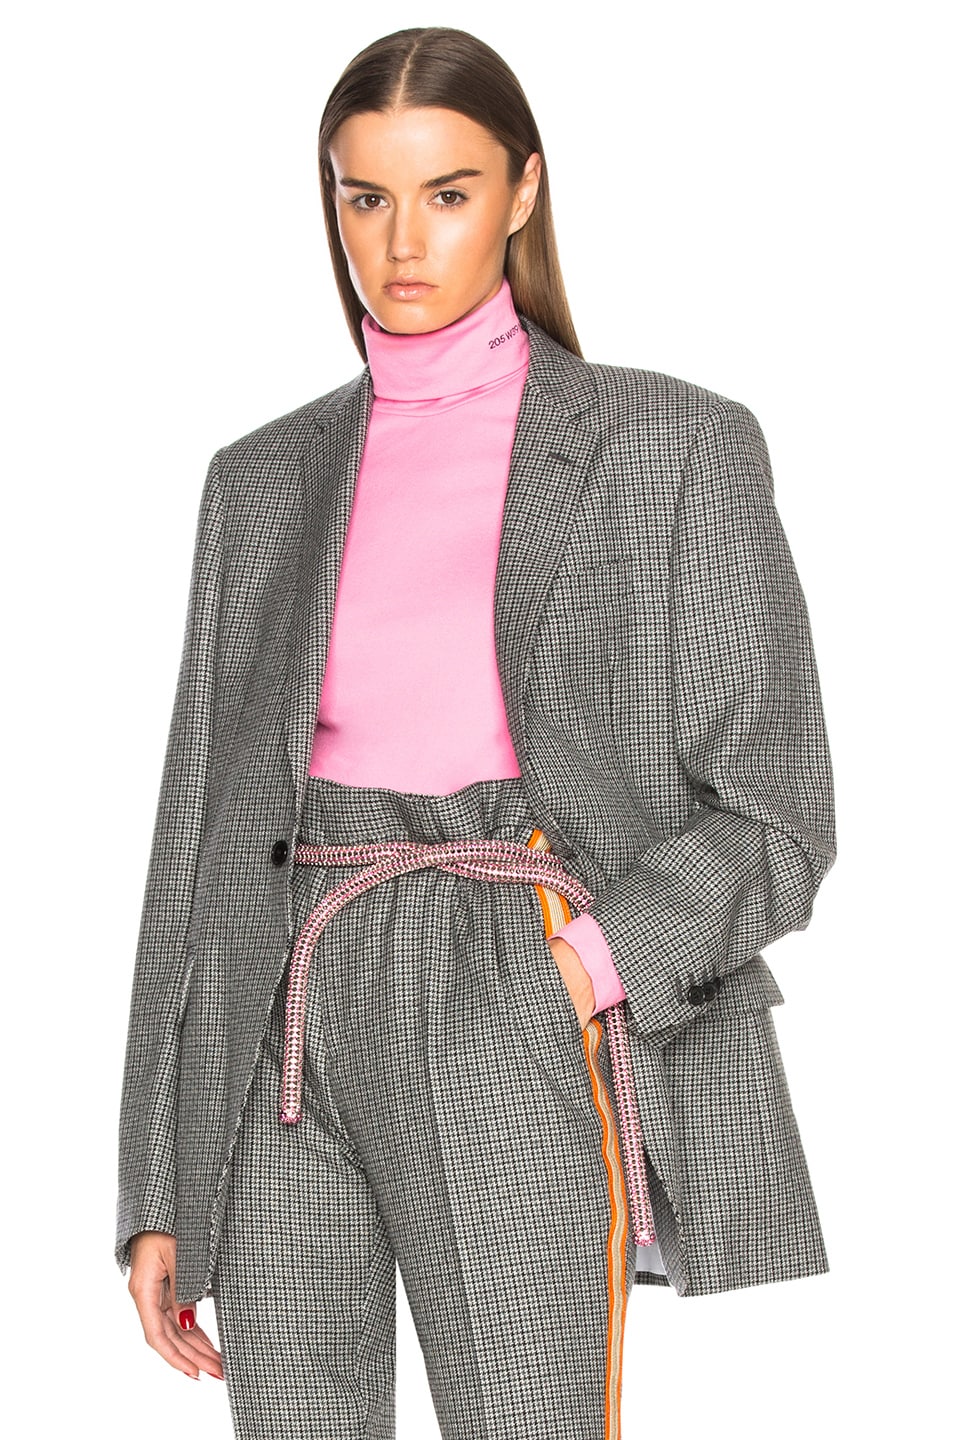 Image 1 of CALVIN KLEIN 205W39NYC Fancy Wool Check Single Breasted Jacket in Grey